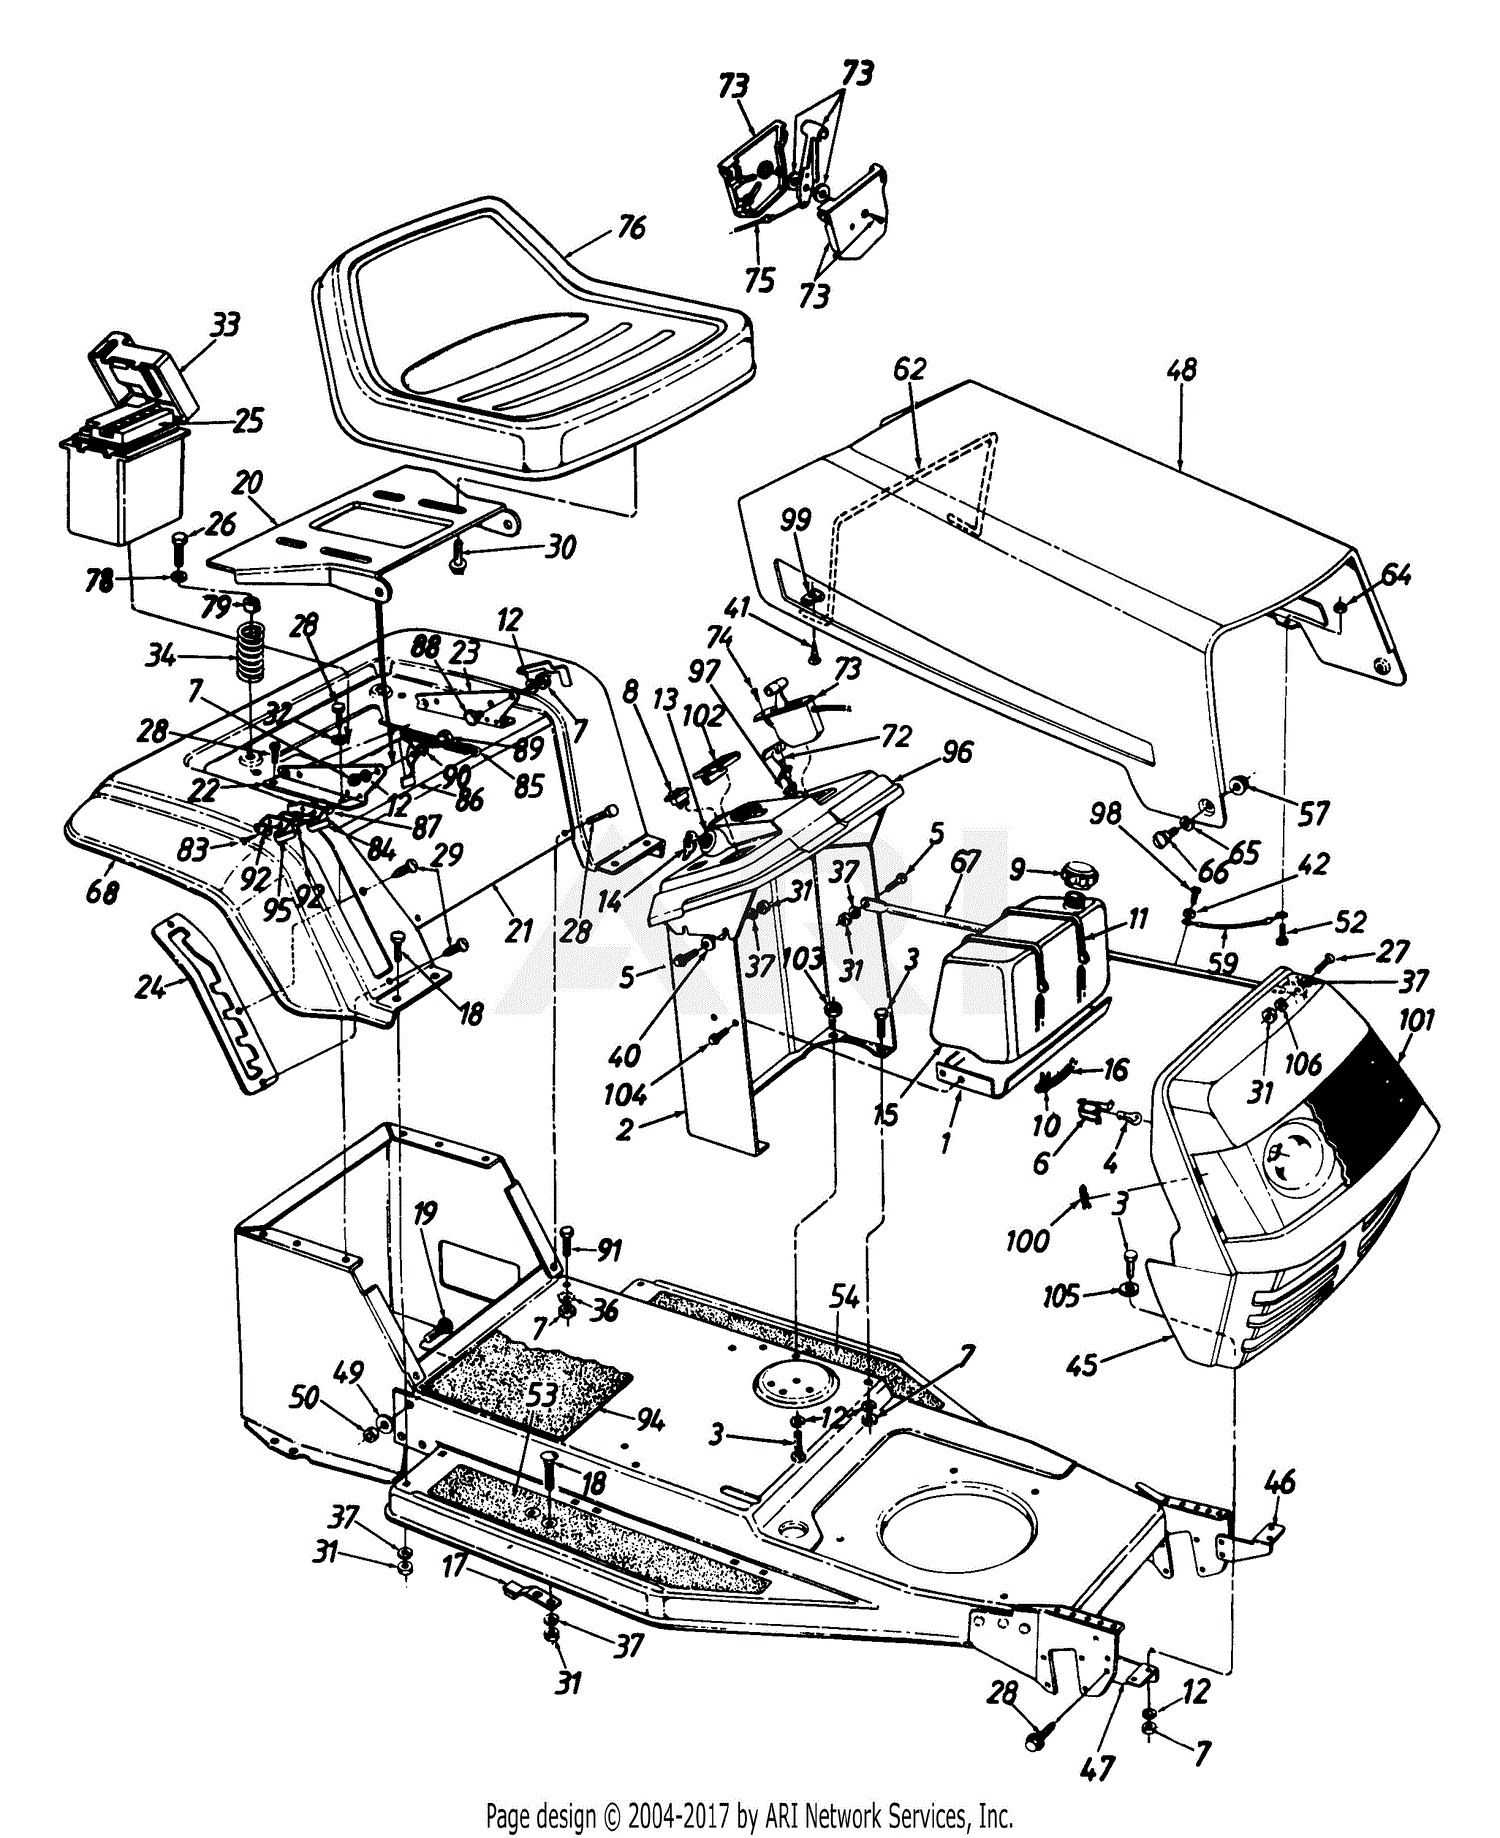 Parts For Mtd Riding Lawn Mower